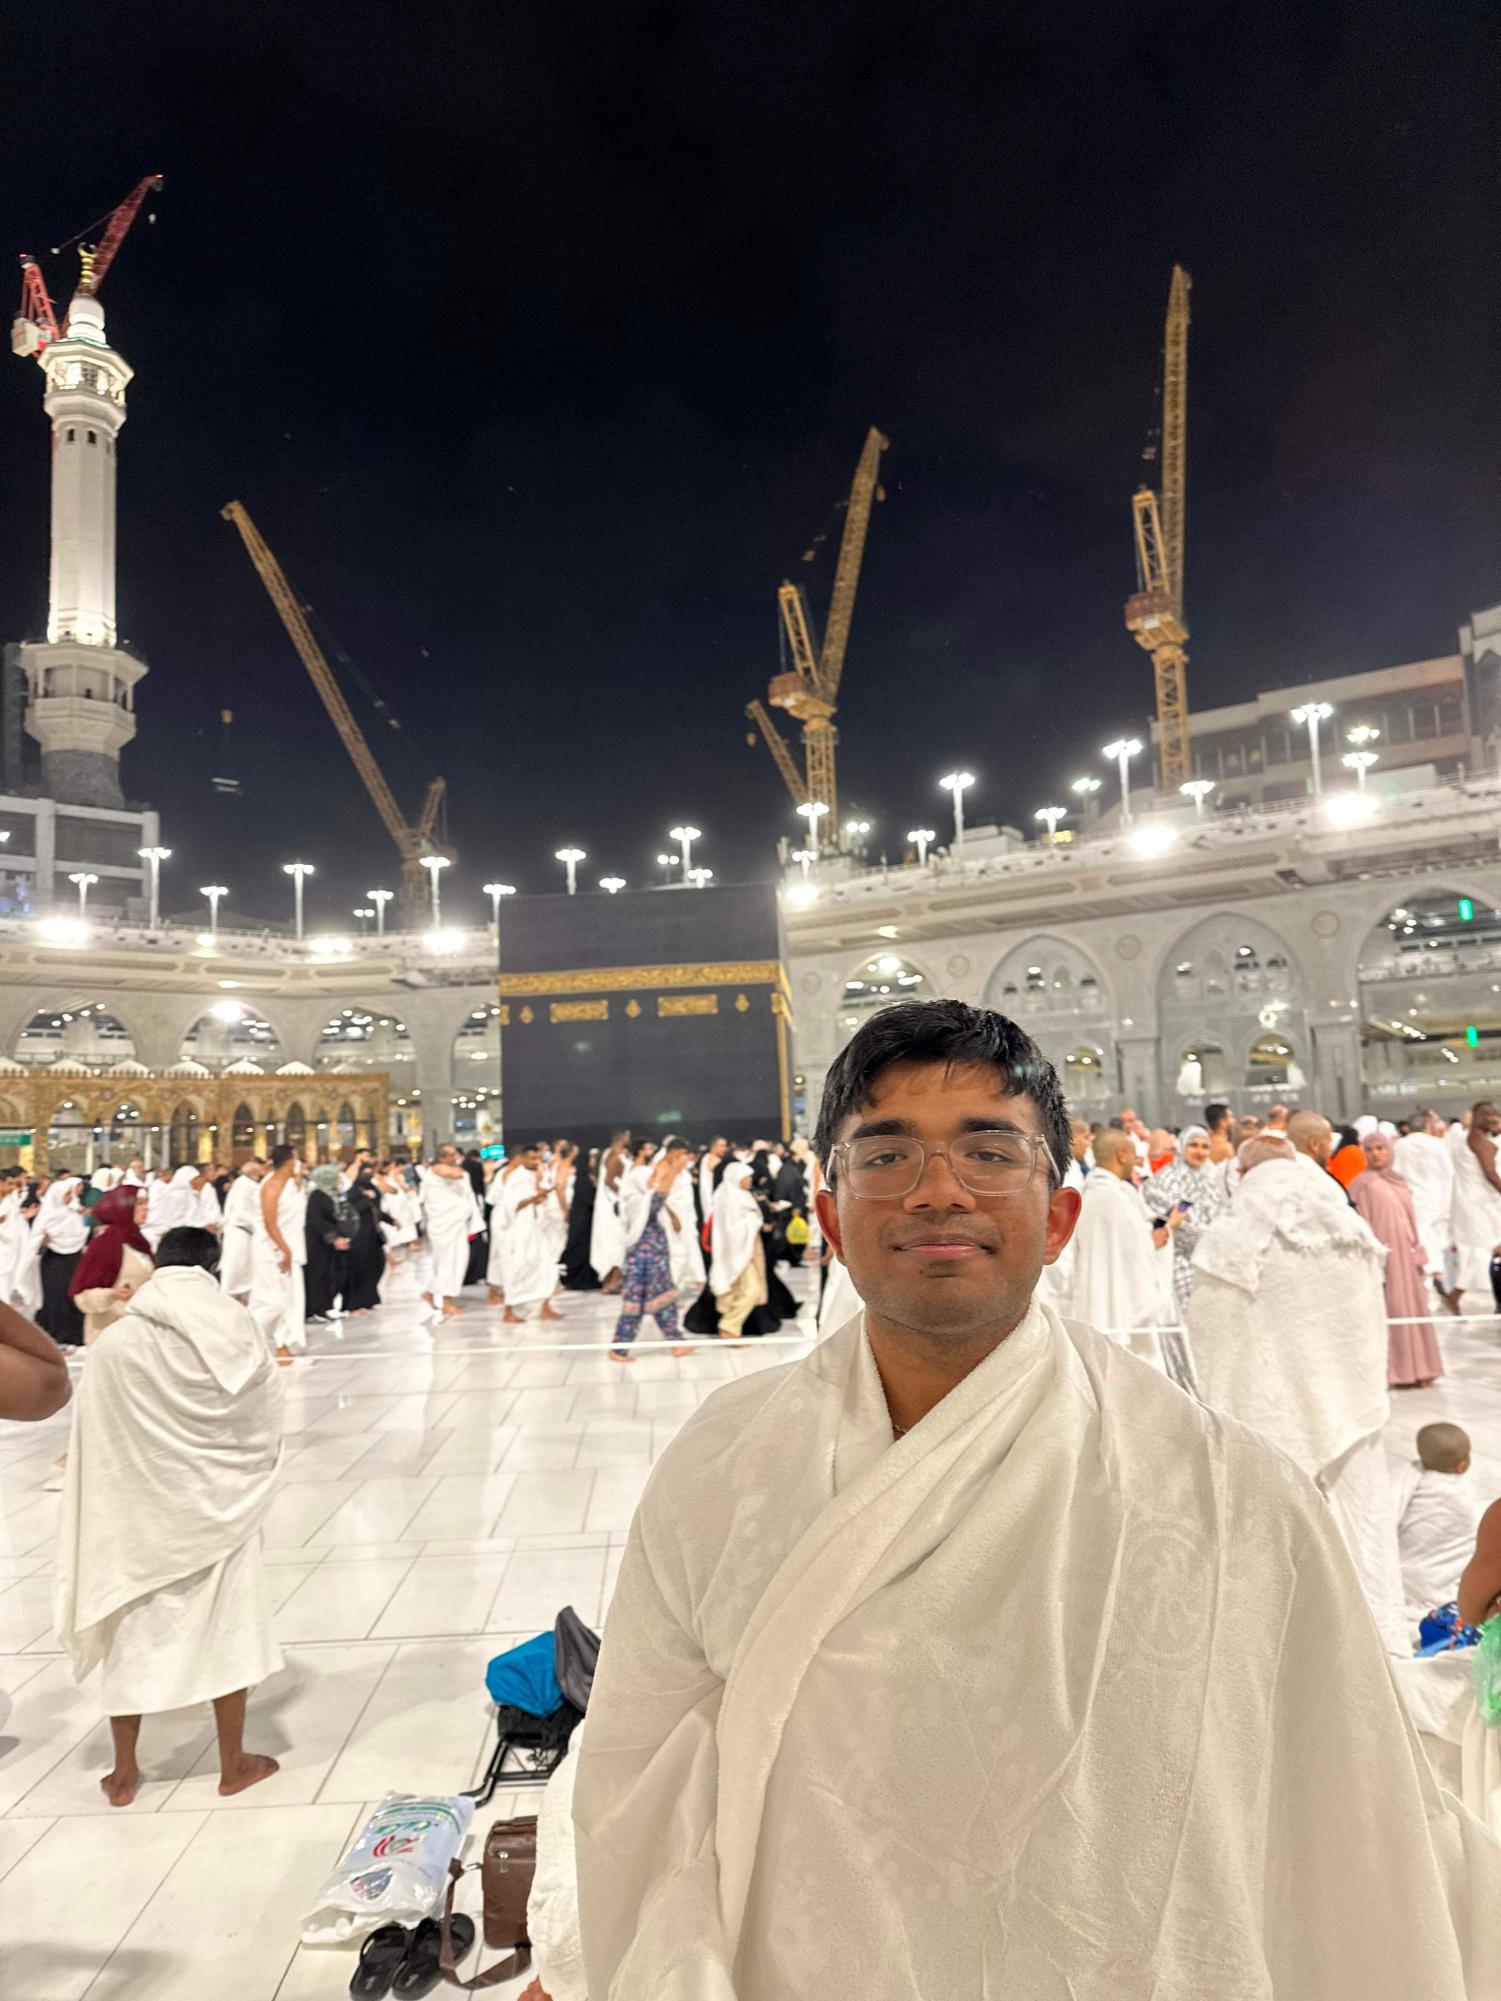 Over spring break, senior Zarif Azher visited Makkah and Medina in Saudi Arabia, two holy cities in the Islamic religion. “Muslims consider praying and performing a ritual called Umrah at these sights very spiritually rewarding,” Azher said. “I did this over Ramadan, which is one of the most popular times to visit these places, and was enthralled by the huge sense of community I felt there among millions of other Muslims.”